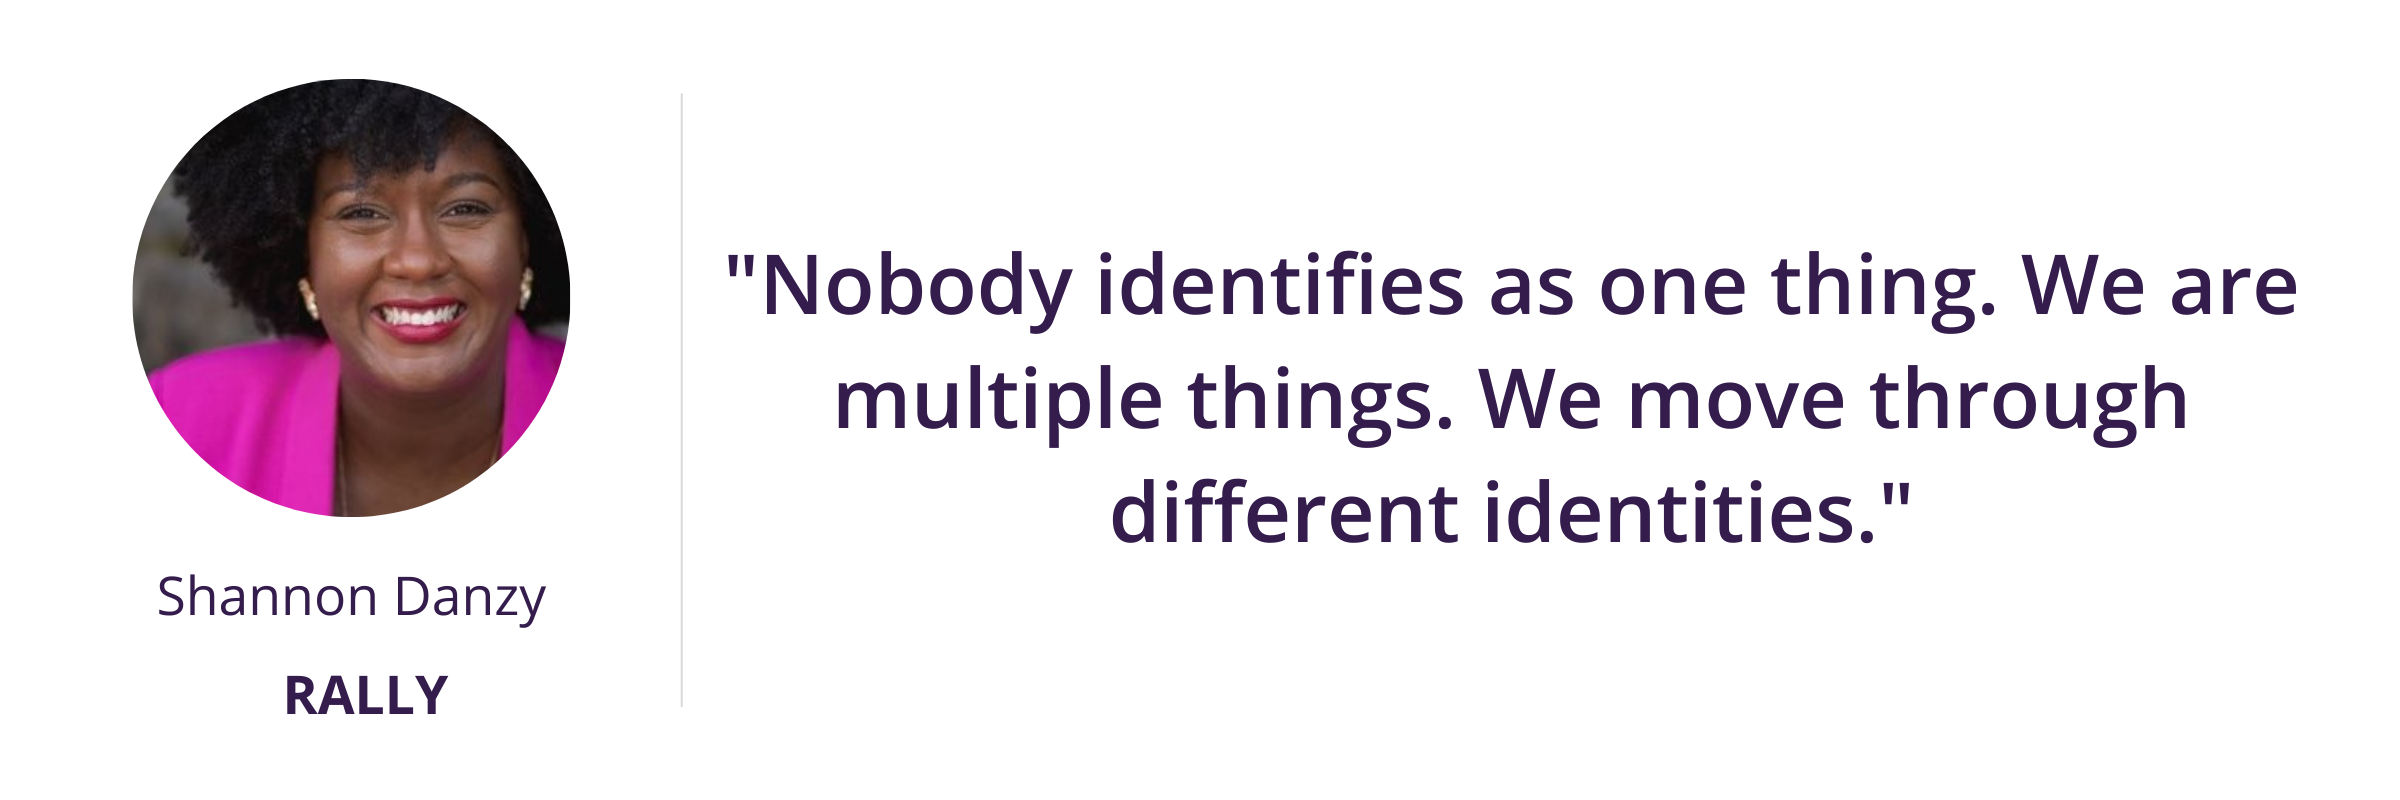 "Nobody identifies as one thing. We are multiple things. We move through different identities."